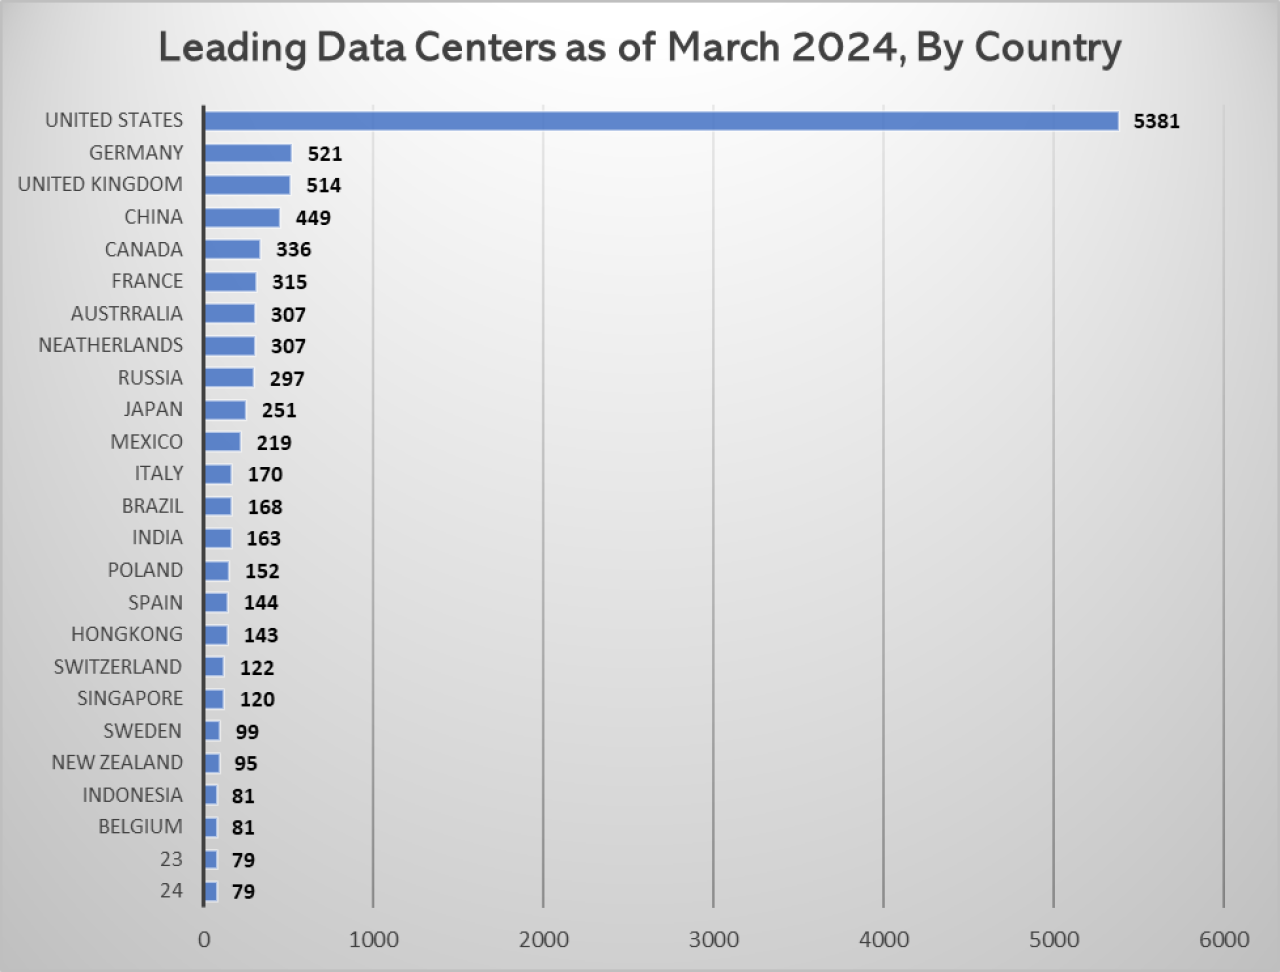 Leading data centers by country in 2024.